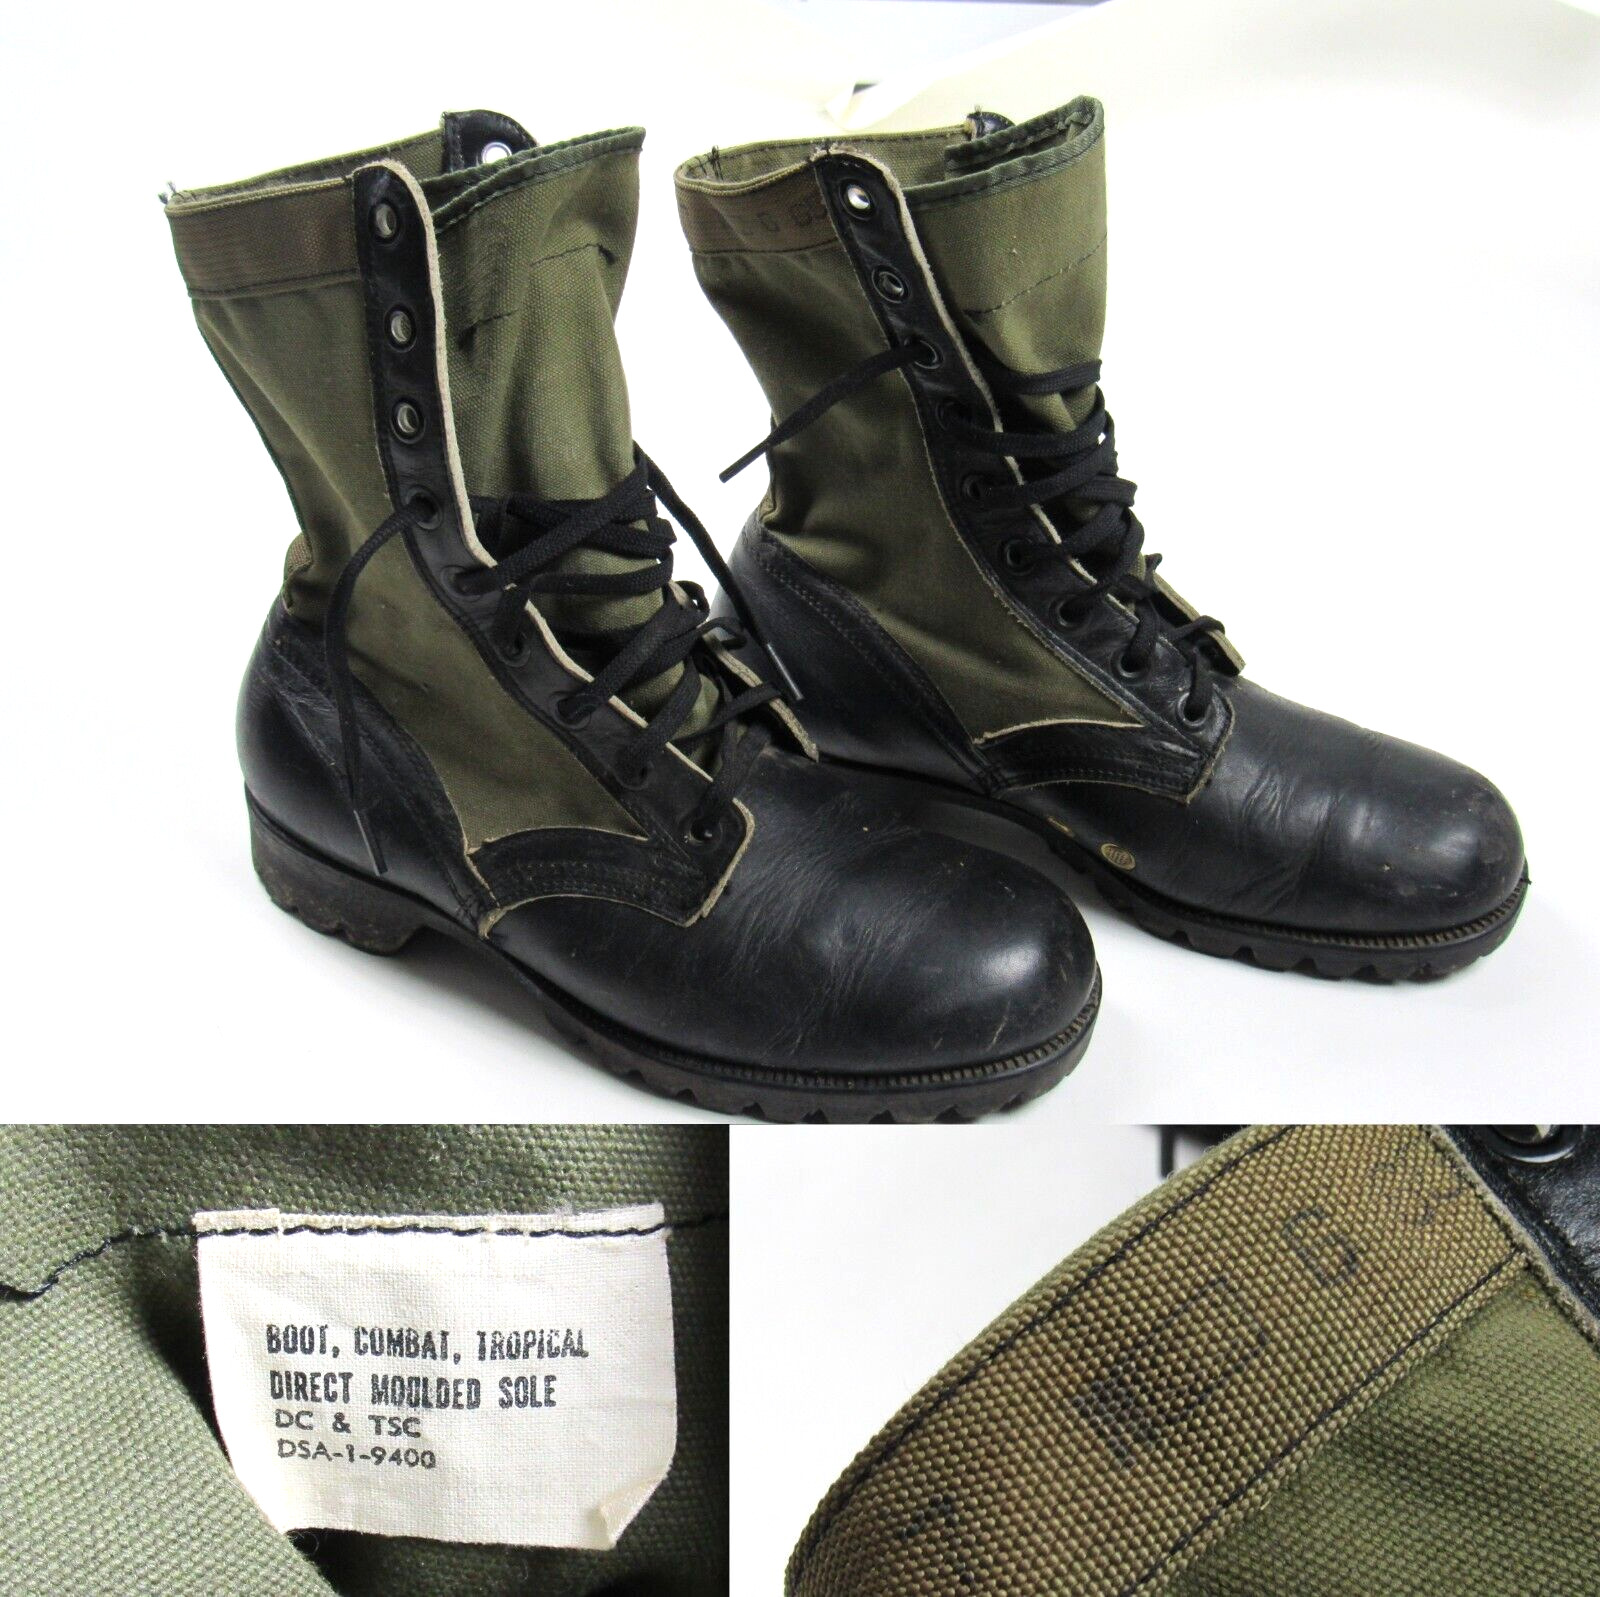 Vtg 1965 US Army 2nd Pattern Combat Tropical 7 W Jungle Boots 60s ARVN Advisor